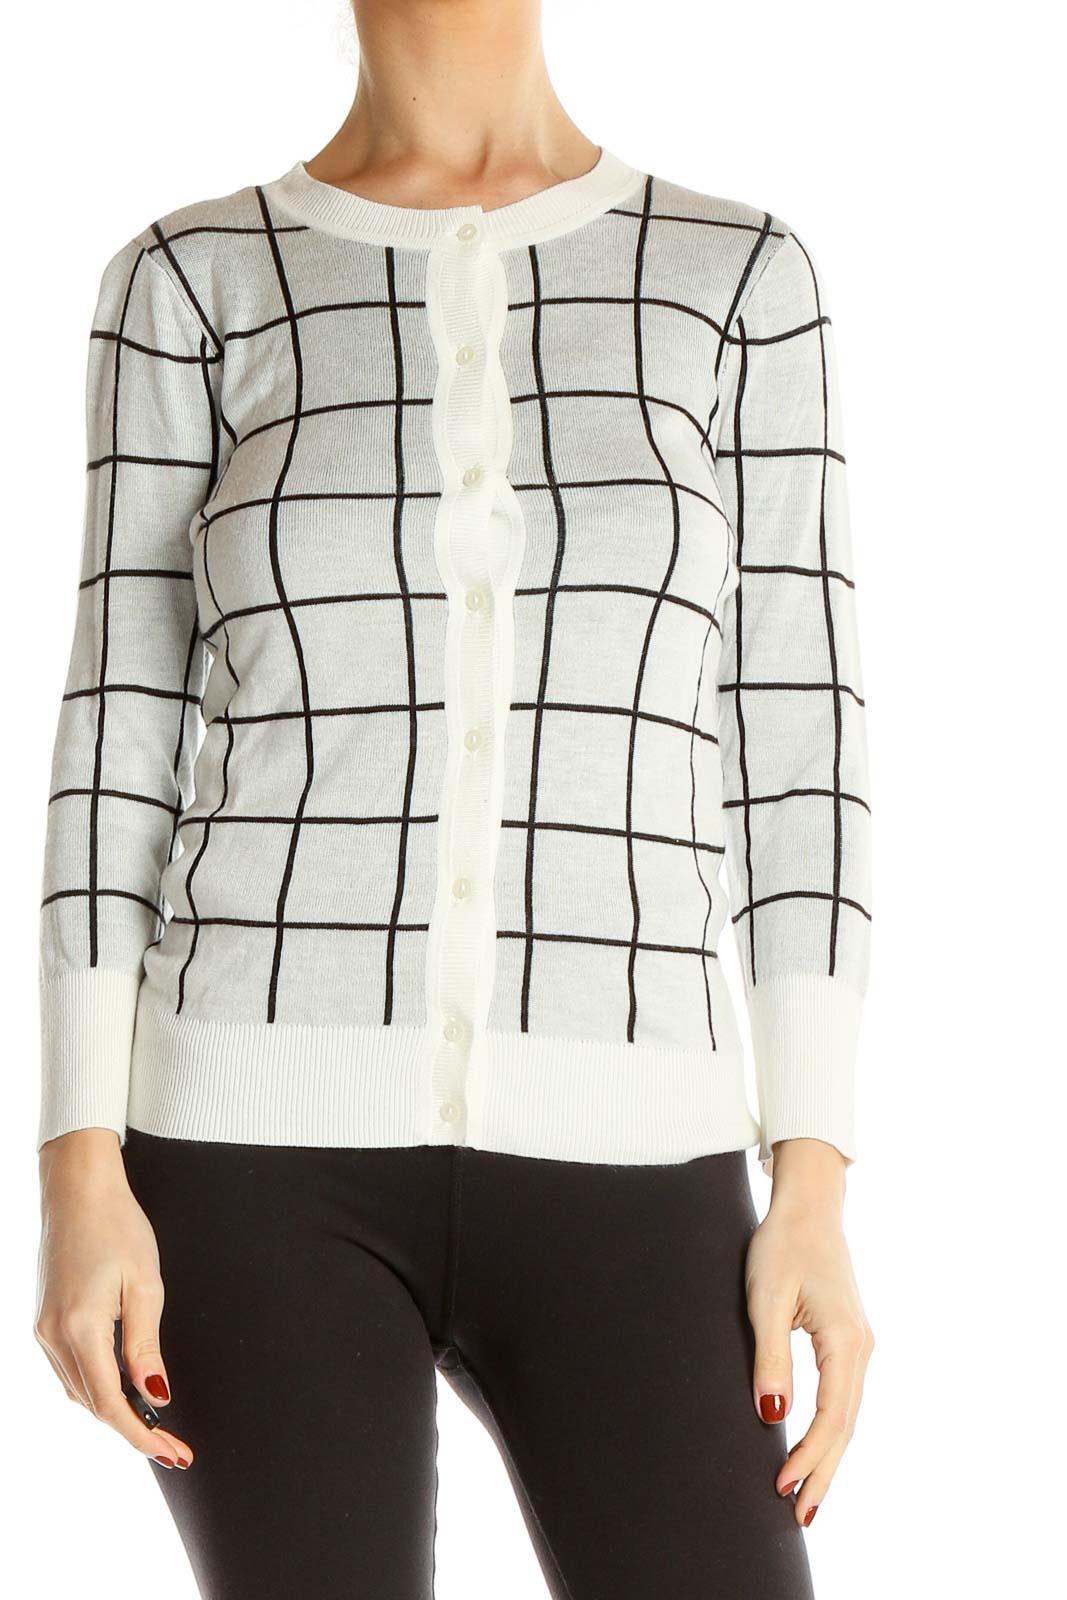 White Checkered Cardigan Front